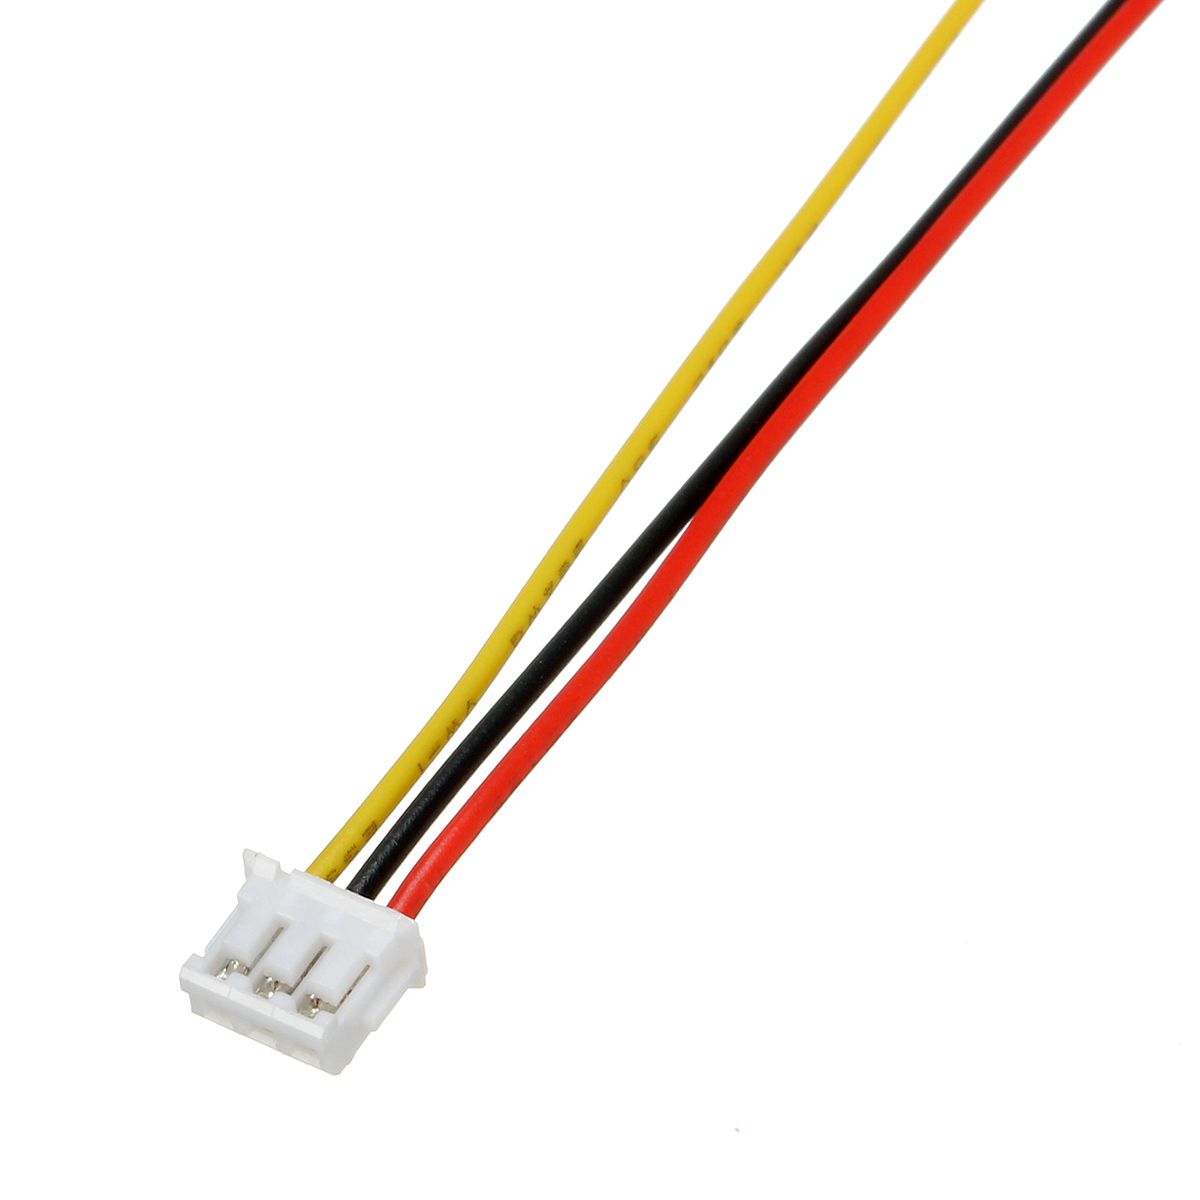 Connector JST micro 1.25mm pitch 3-pin male-male met 10cm kabel